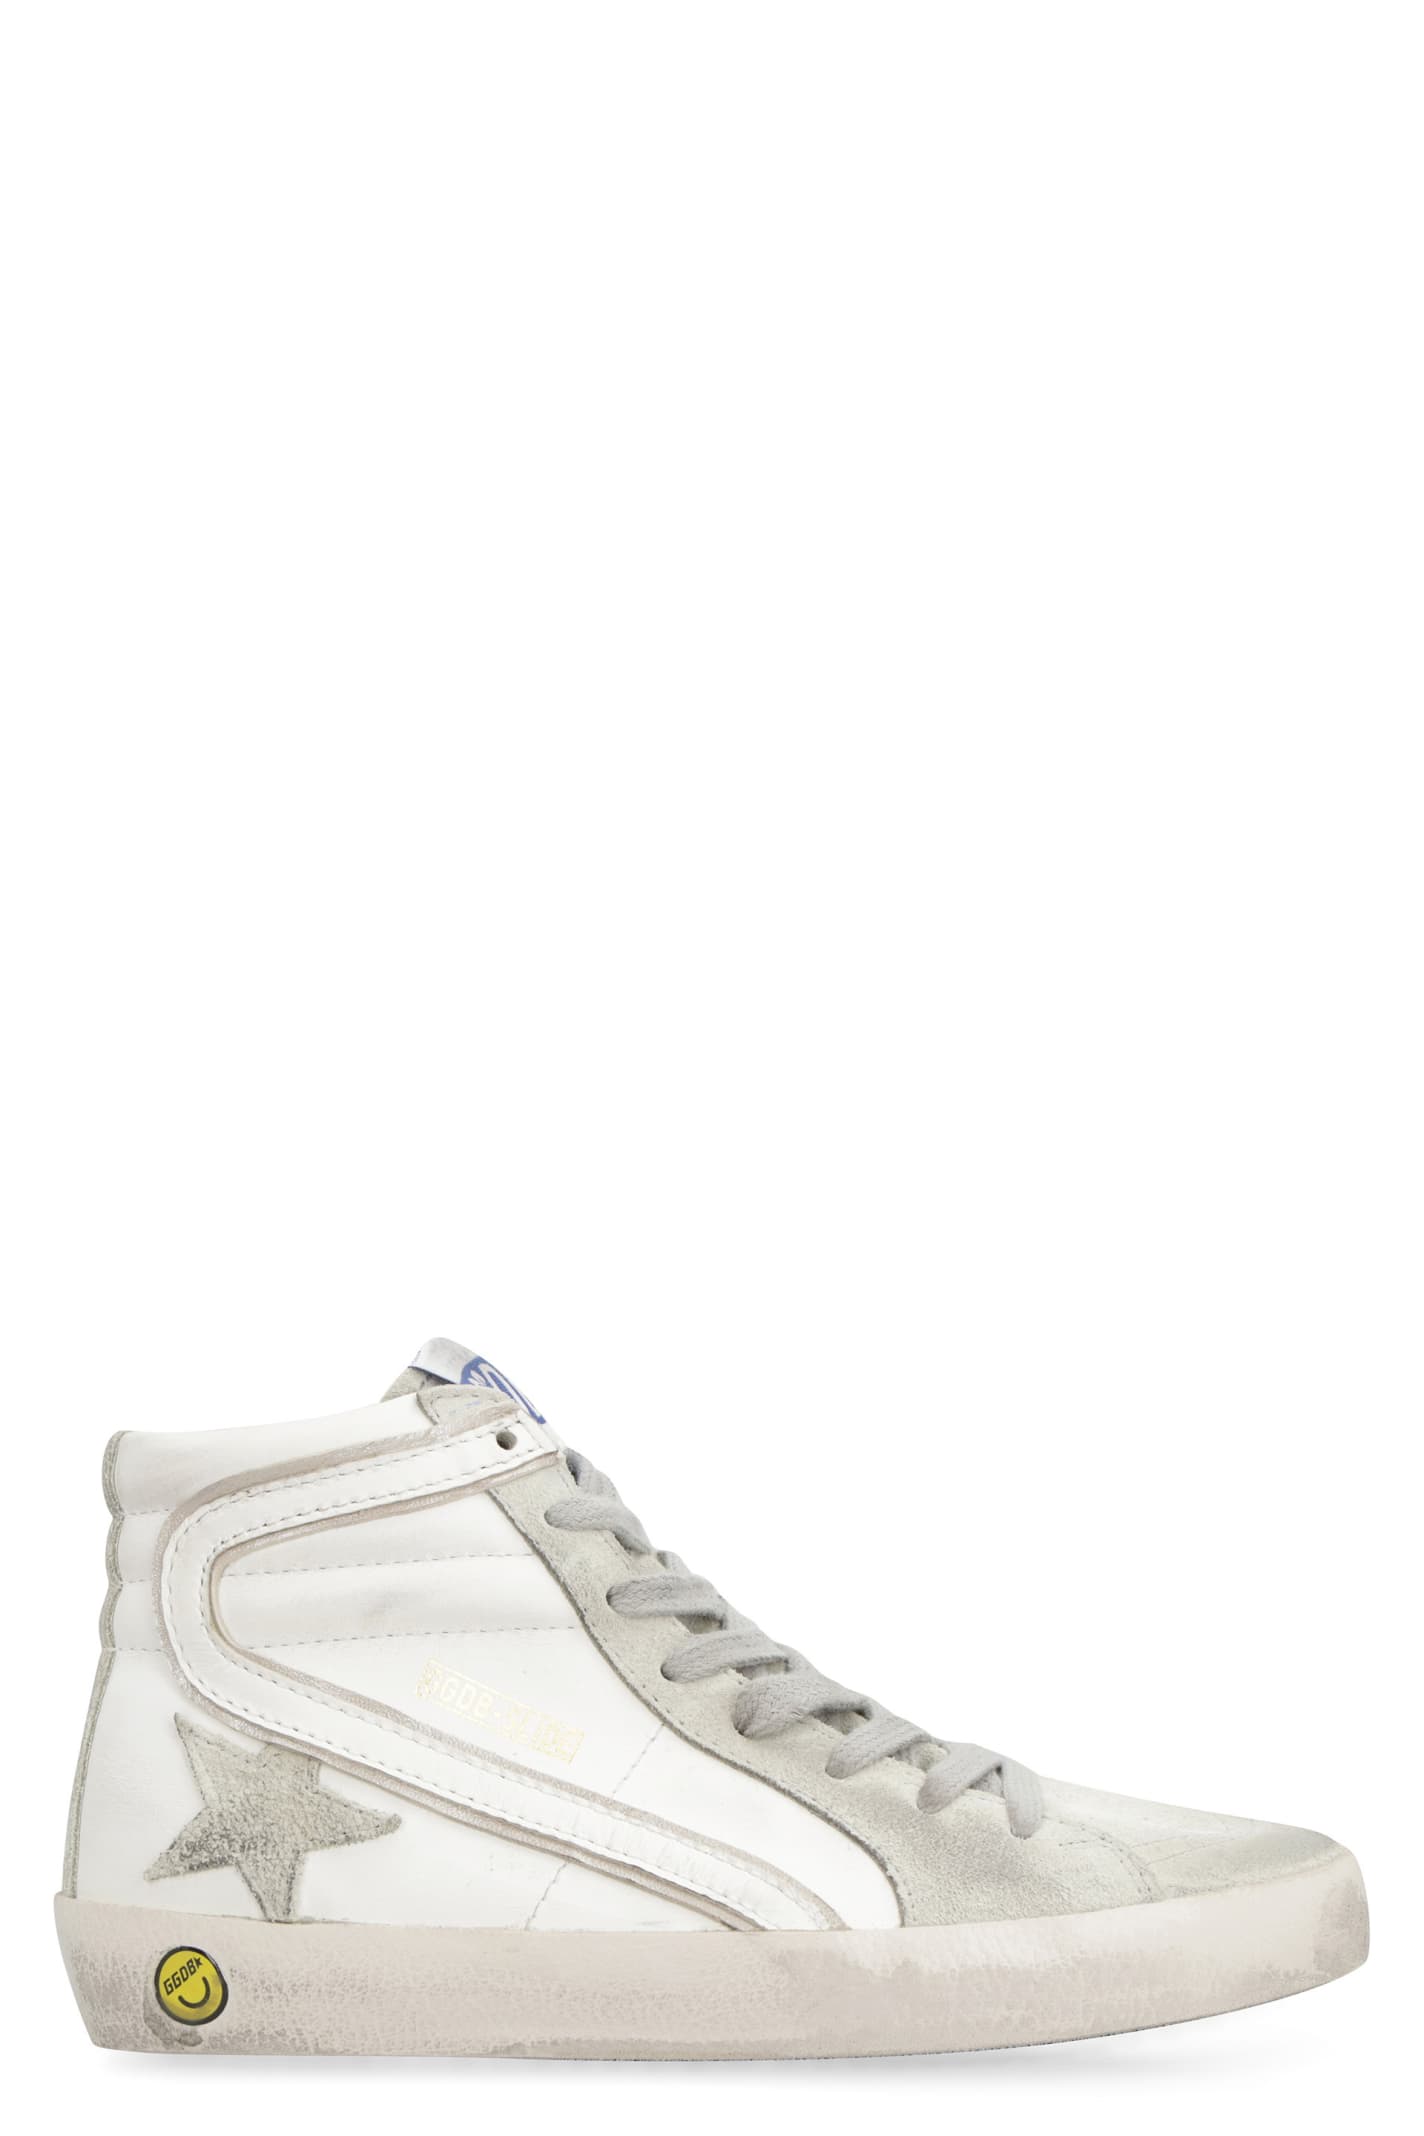 Golden Goose Kids' Slide Leather High-top Sneakers In White